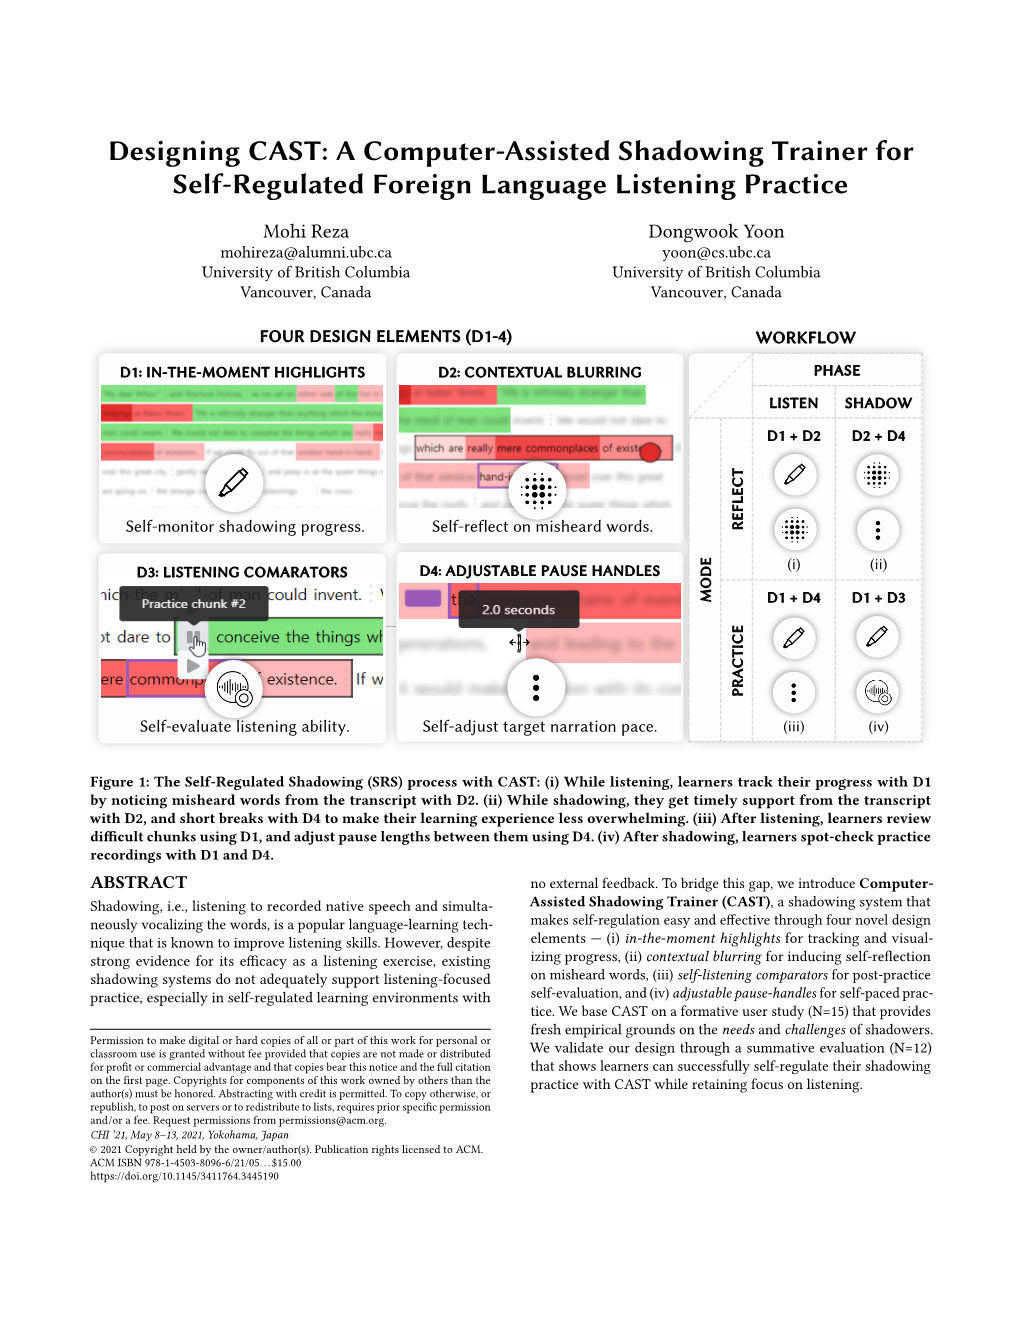 A Computer-Assisted Shadowing Trainer for Self-Regulated Foreign Language Listening Practice